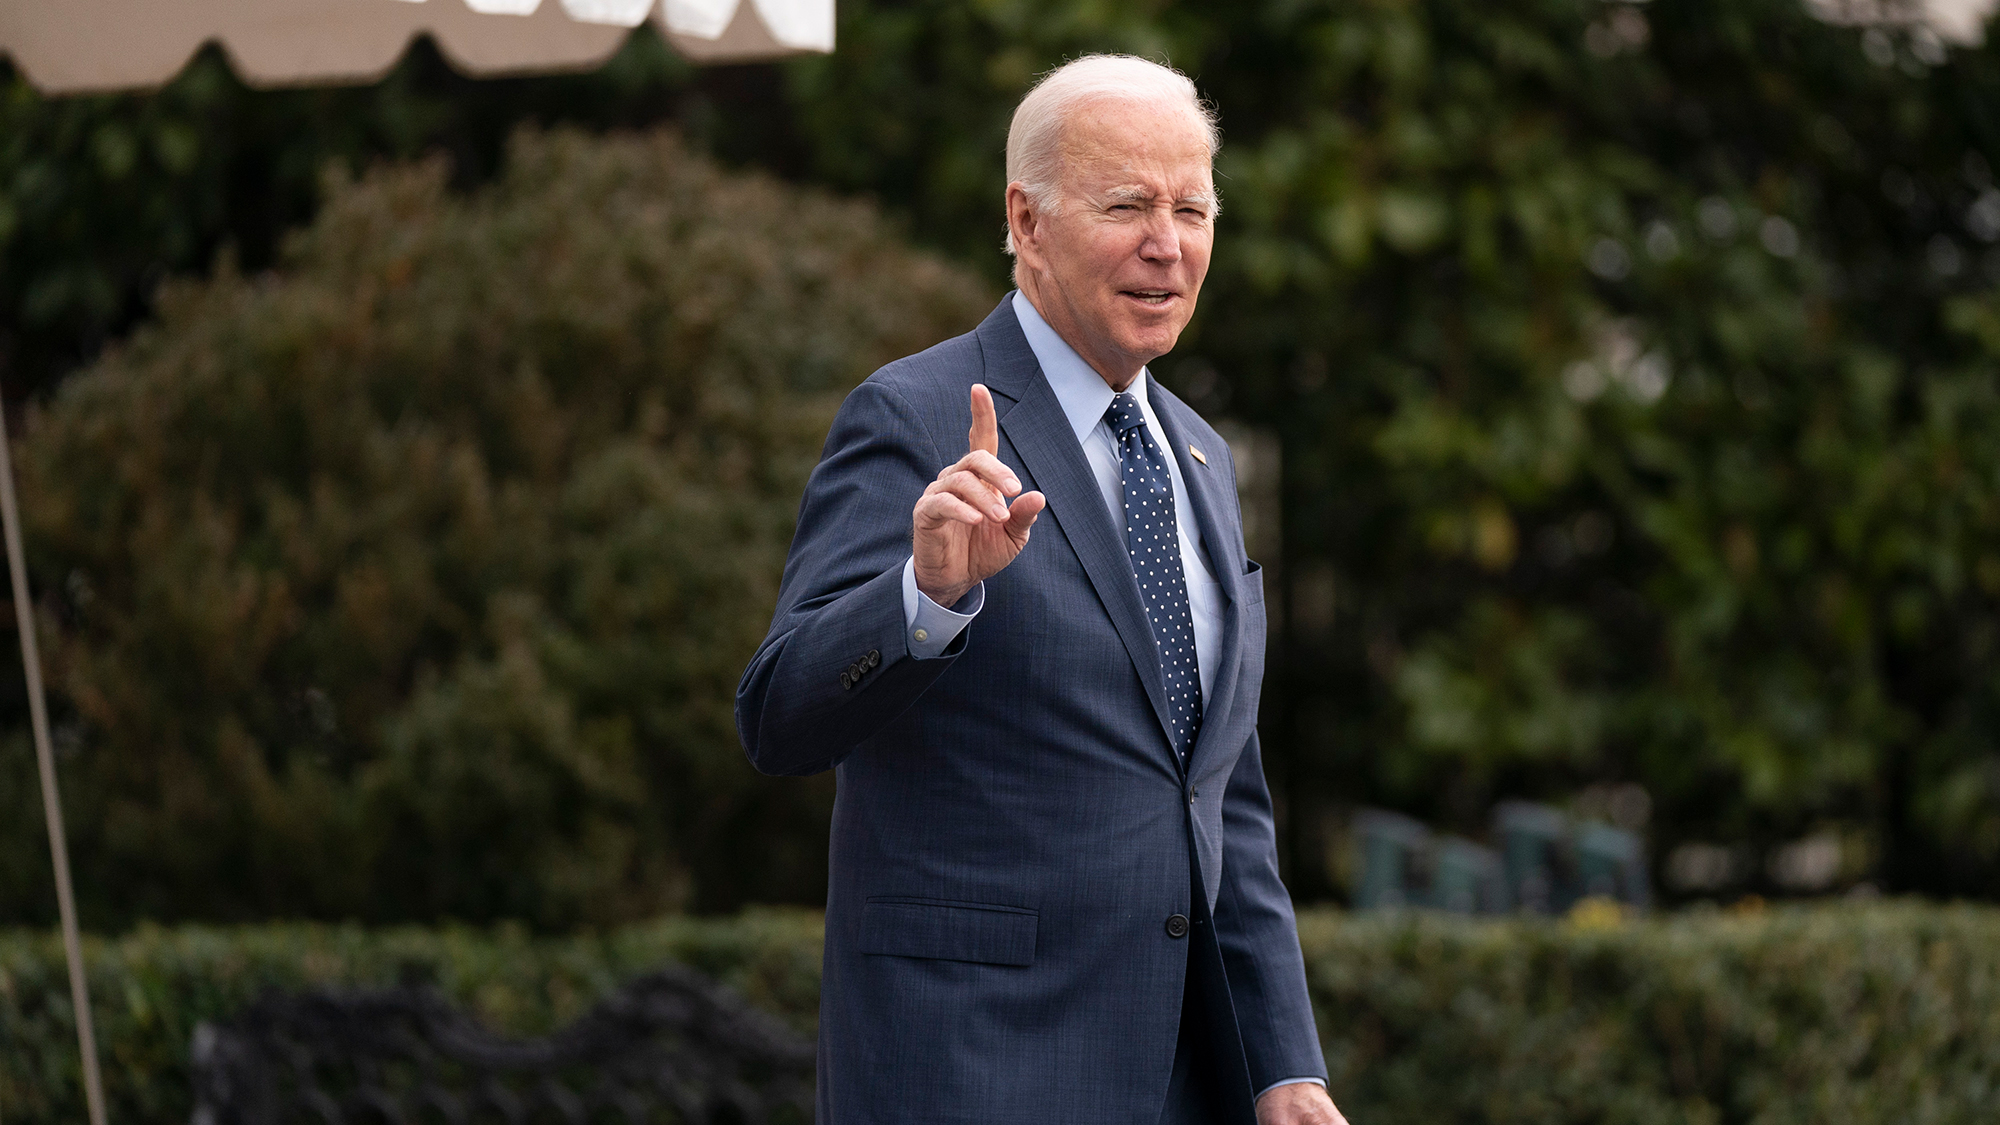 President Joe Biden walks to board Marine One on the South Lawn of the White House on Thursday.